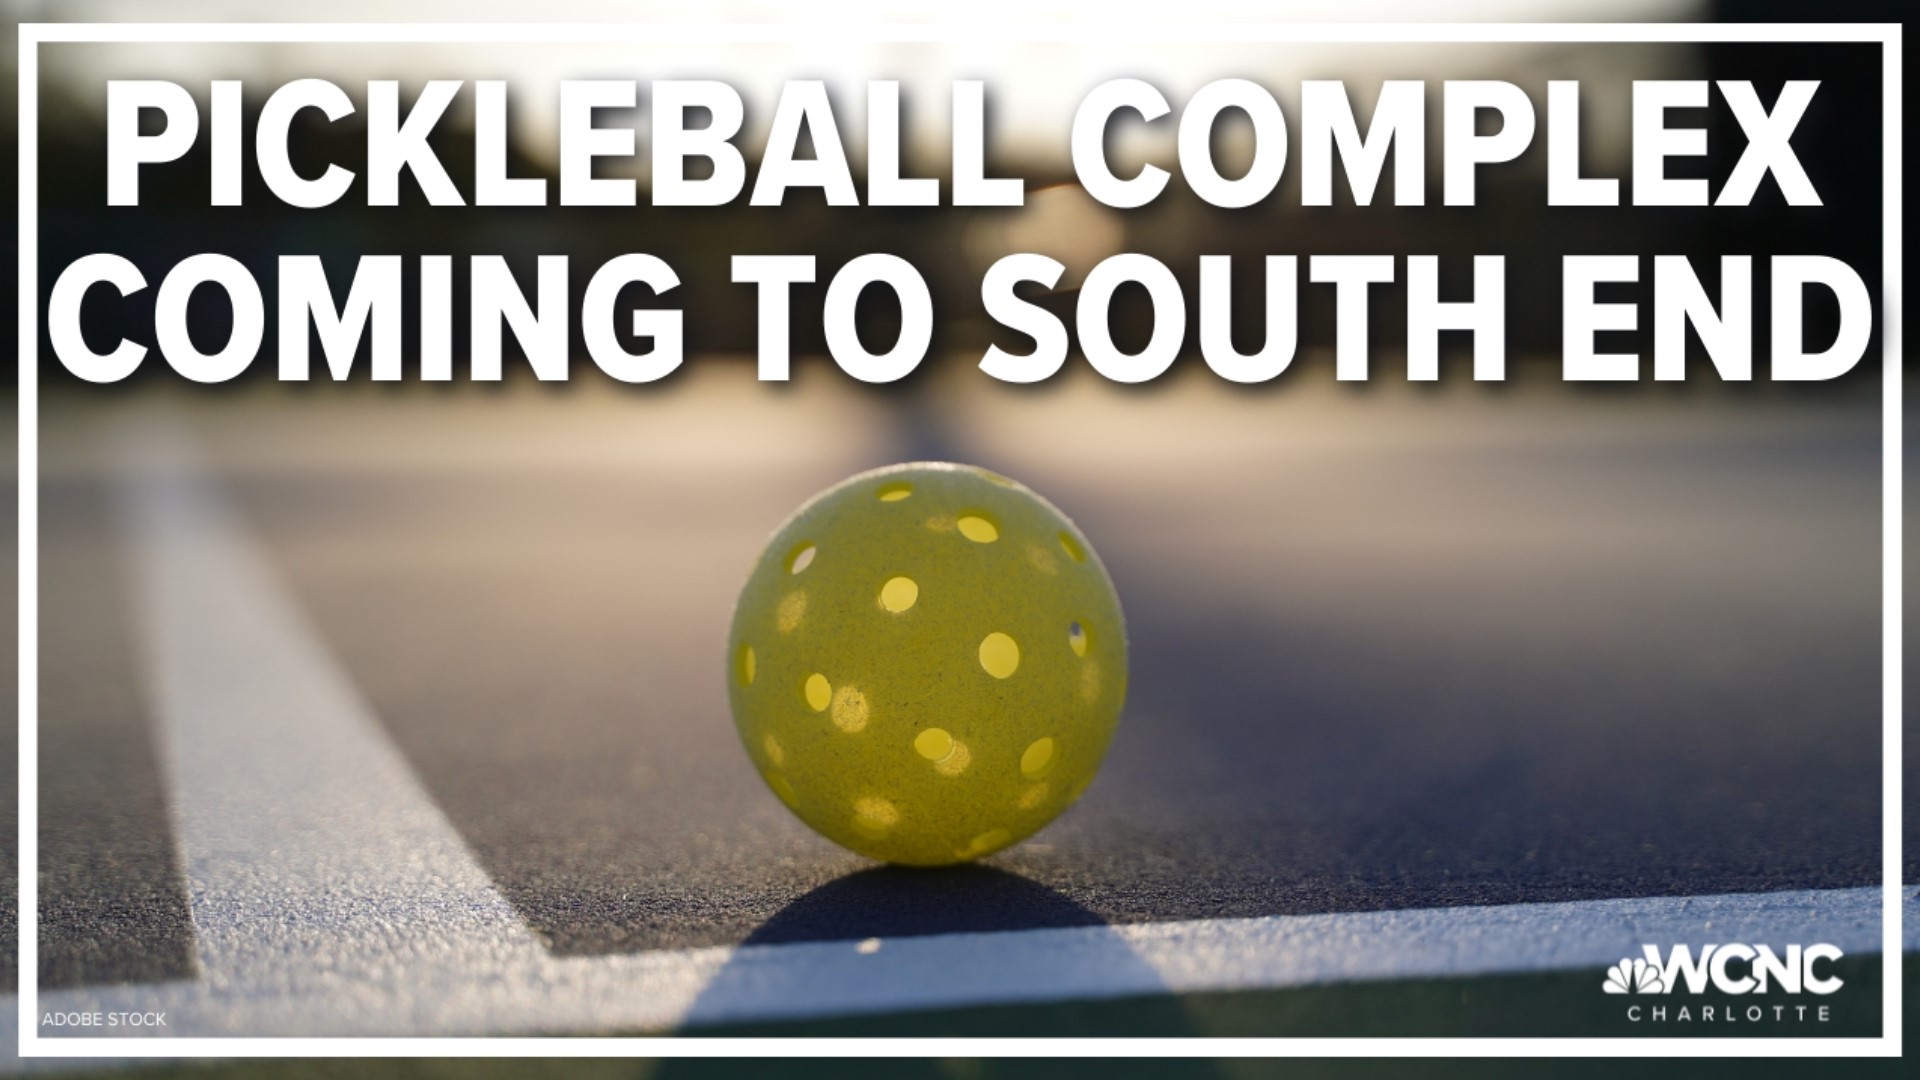 The facility promises to deliver an unparalleled pickleball experience along with food and drinks, events and entertainment.